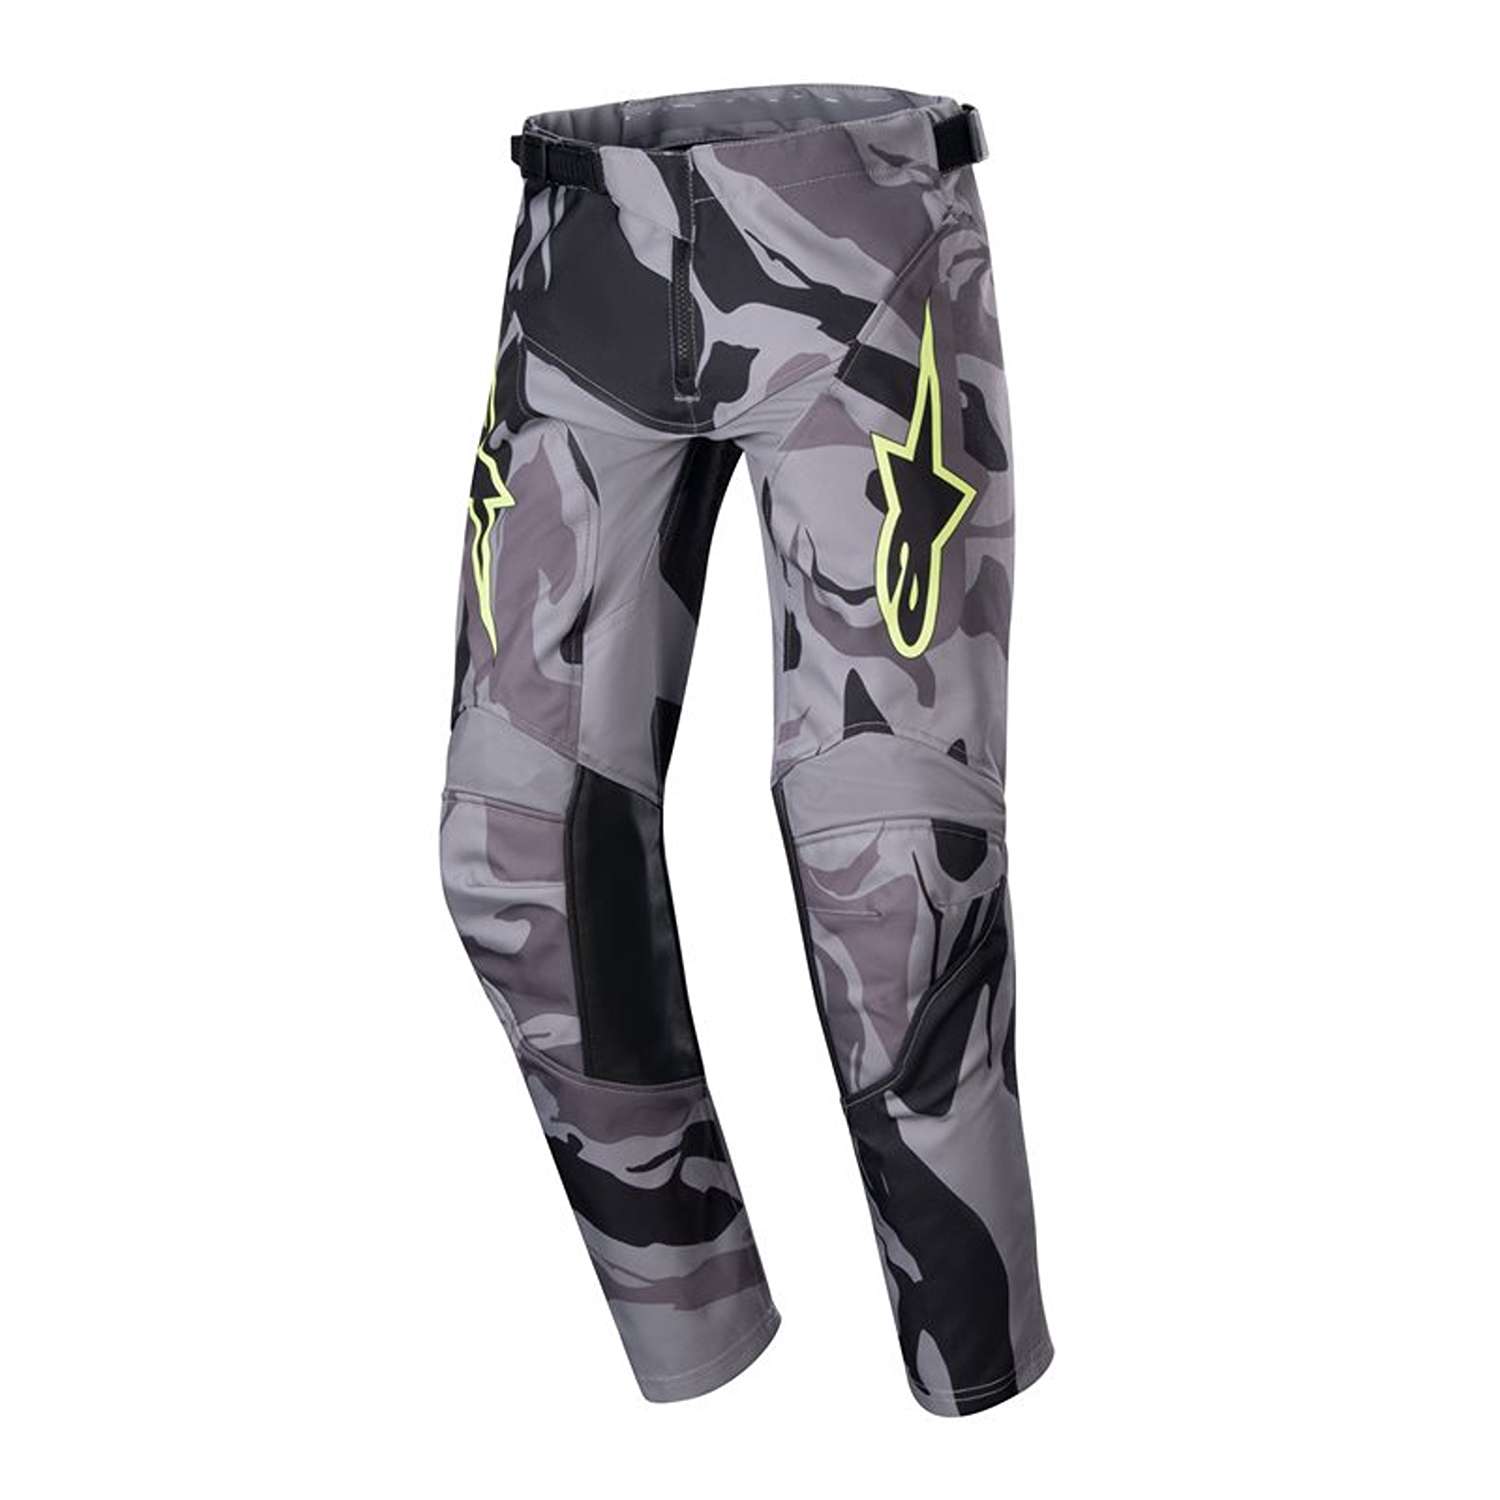 Image of Alpinestars Youth Racer Tactical Pants Cast Gray Camo Magnet Talla 28